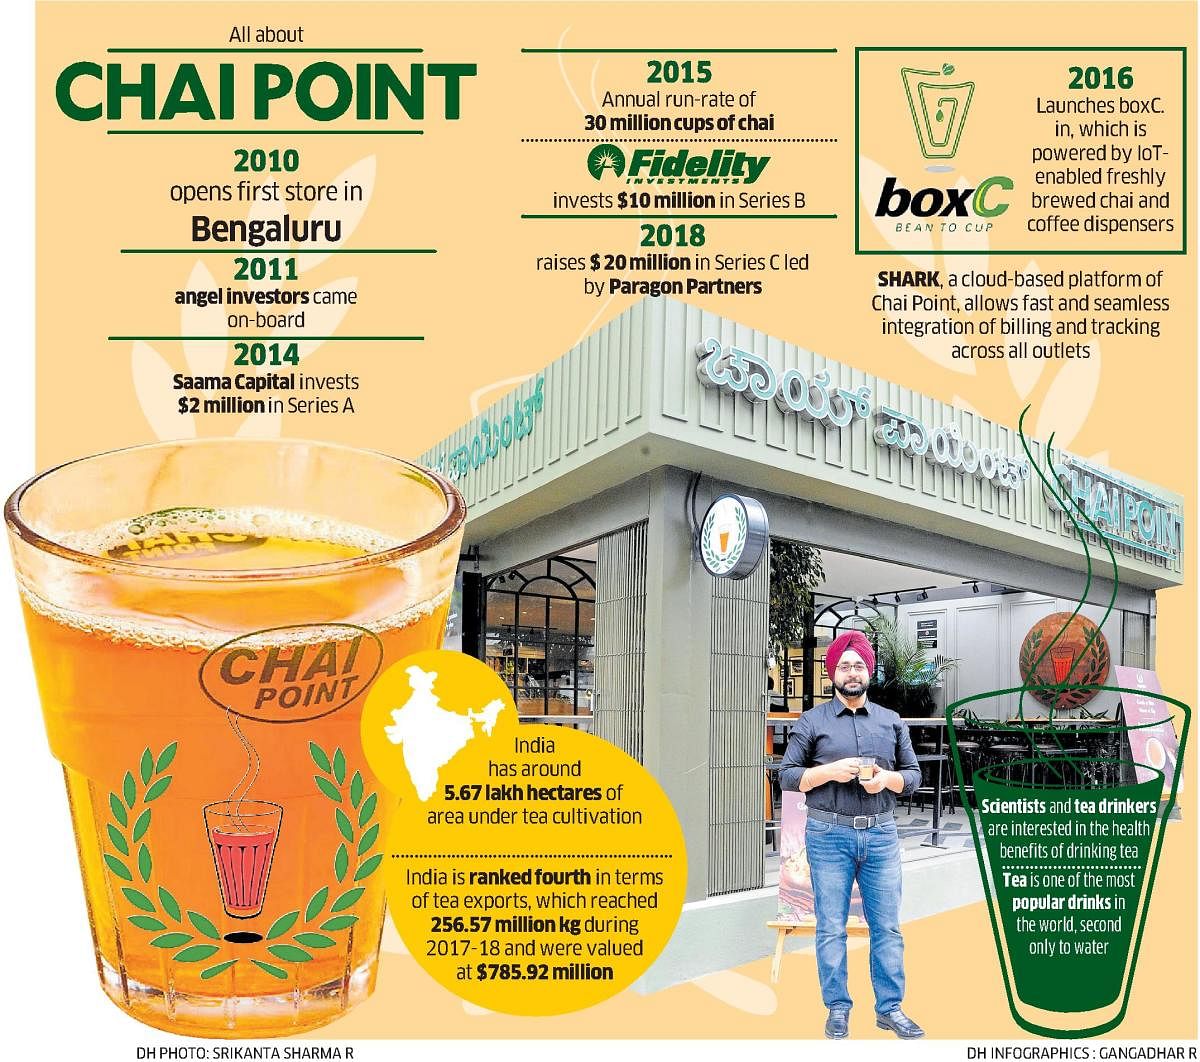 In 2014, the company raised $2 million through a Series A round of funding. From then on, Chai Point started evolving and thereby increasing its reach and offers to consumers to make their cup of tea memorable. (DH Graphic/Gangadhar R)